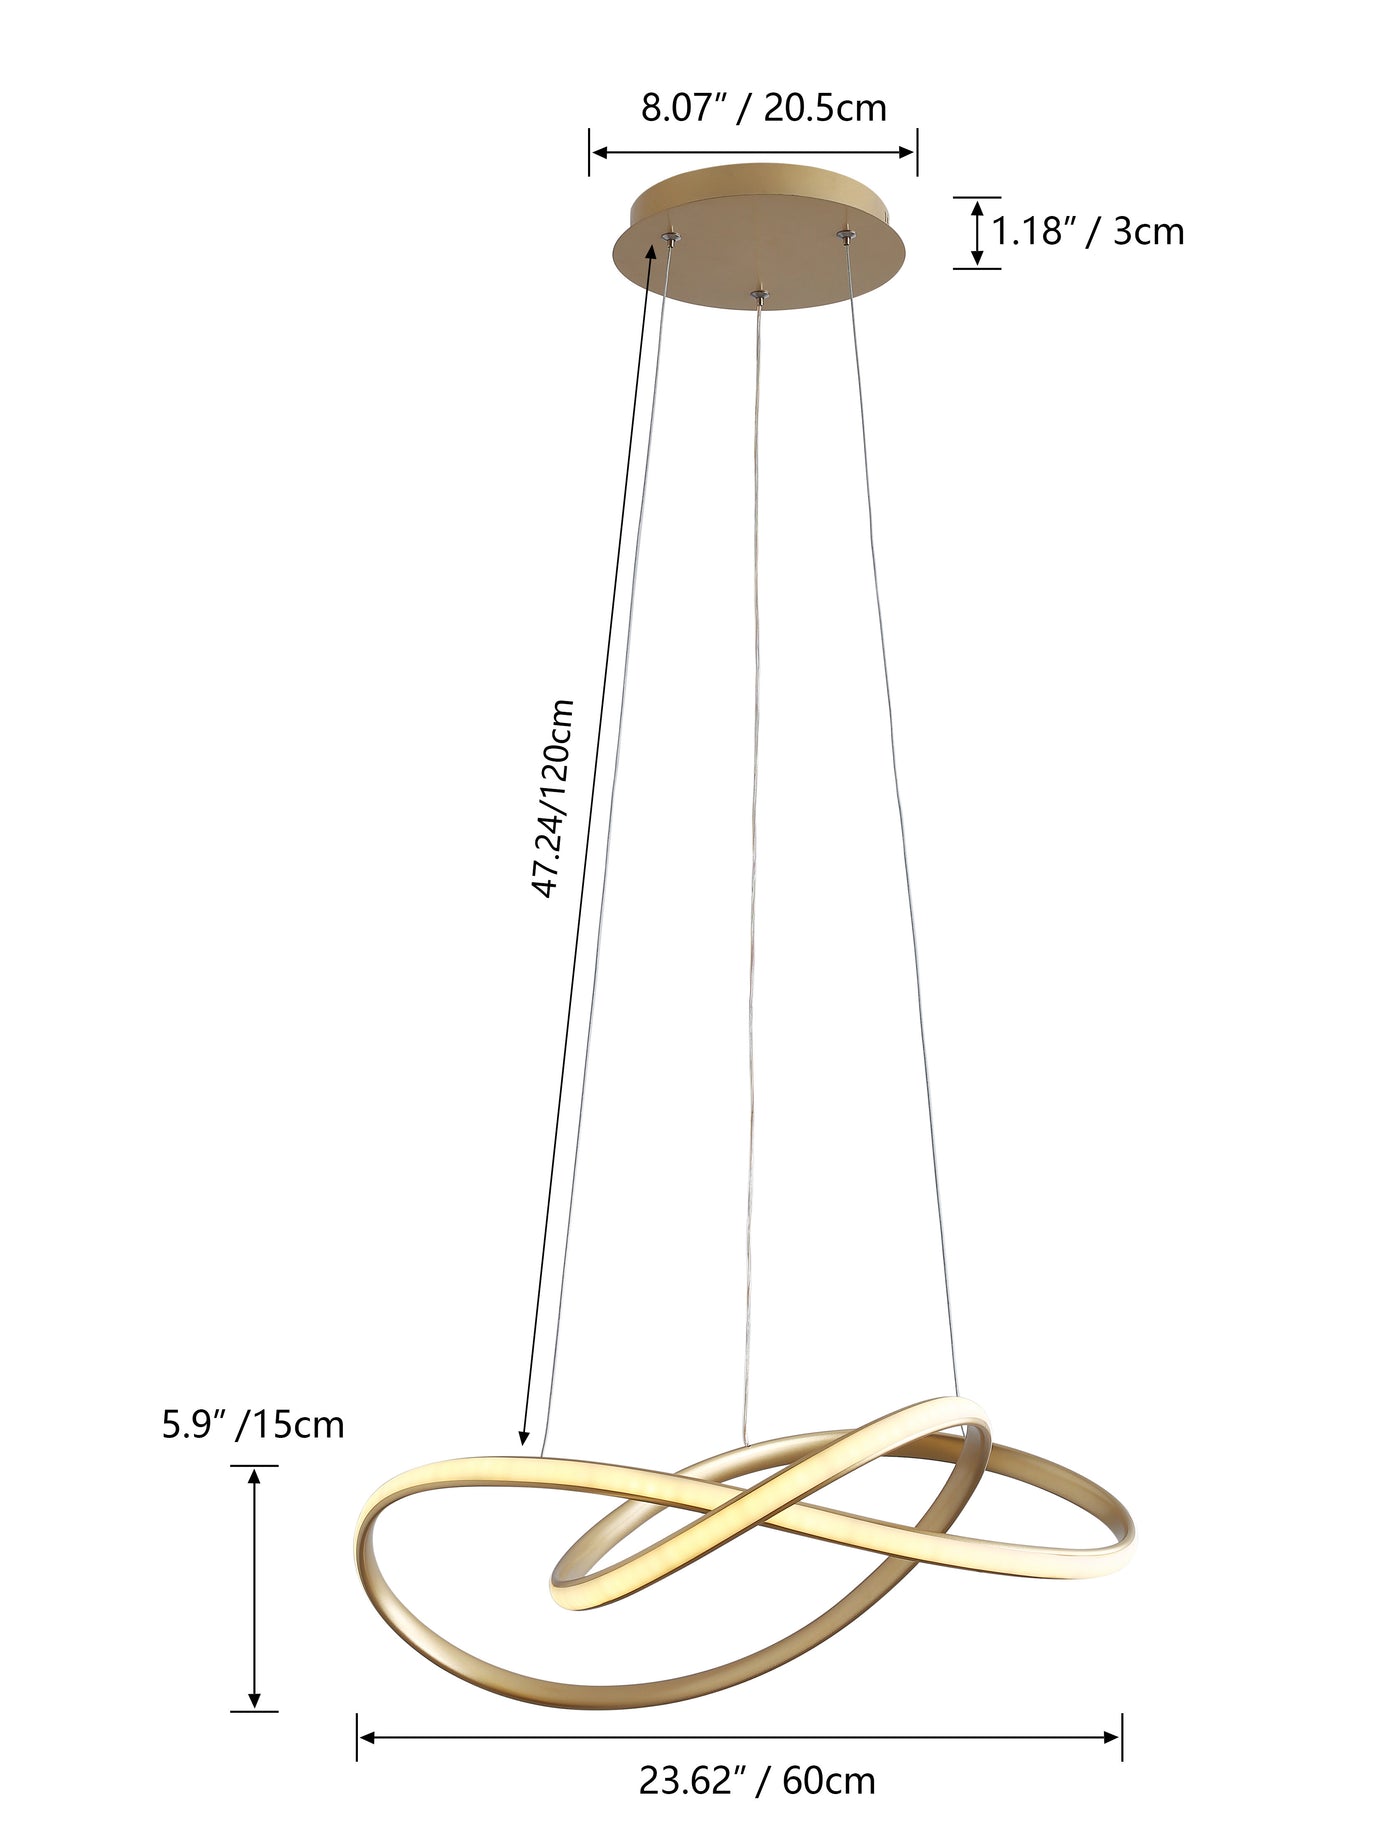 1-Light Concise Wacy Linear LED Chandelier